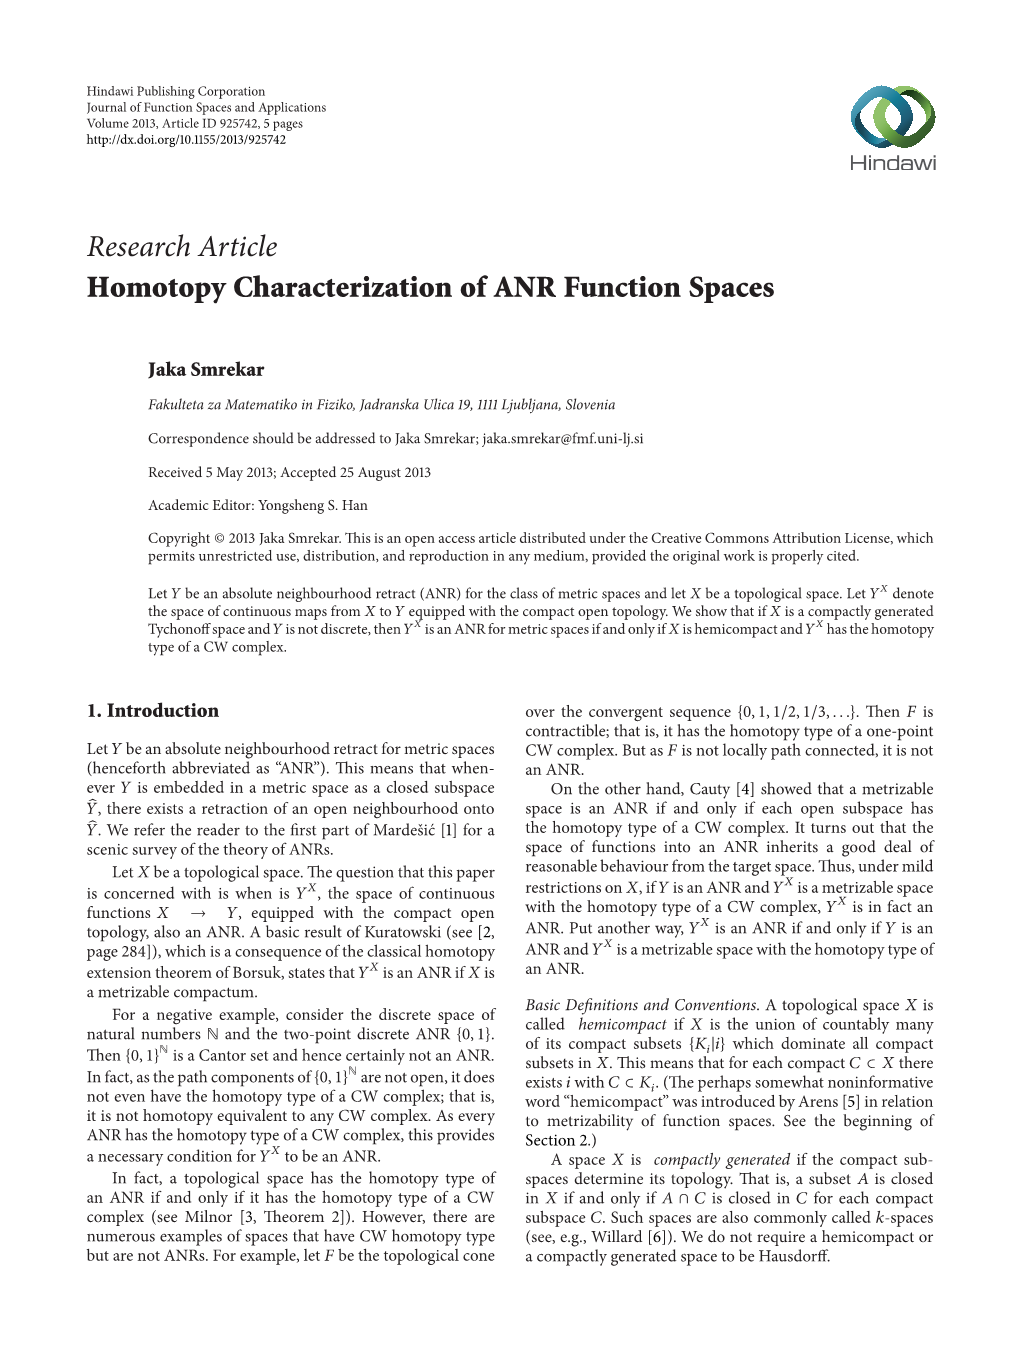 Homotopy Characterization of ANR Function Spaces